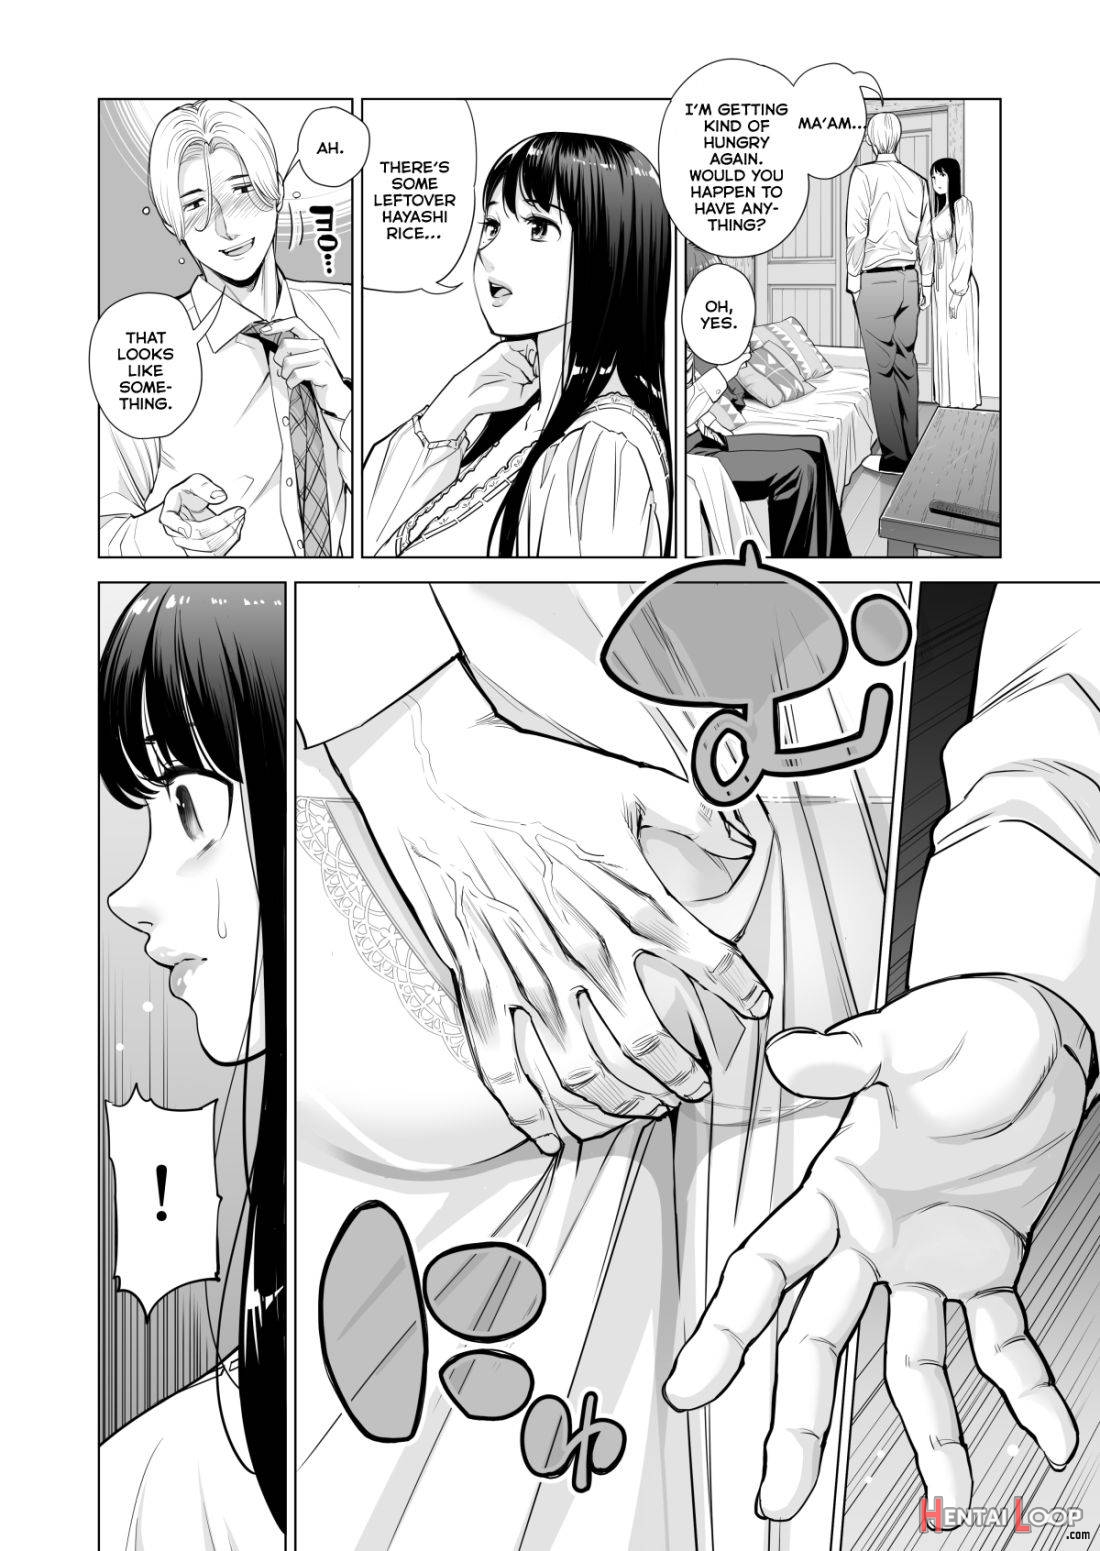 Tsukiyo no Midare Zake (Zenpen) Moonlit Intoxication ~ A Housewife Stolen by a Coworker Besides her Blackout Drunk Husband ~ Chapter 1 page 16